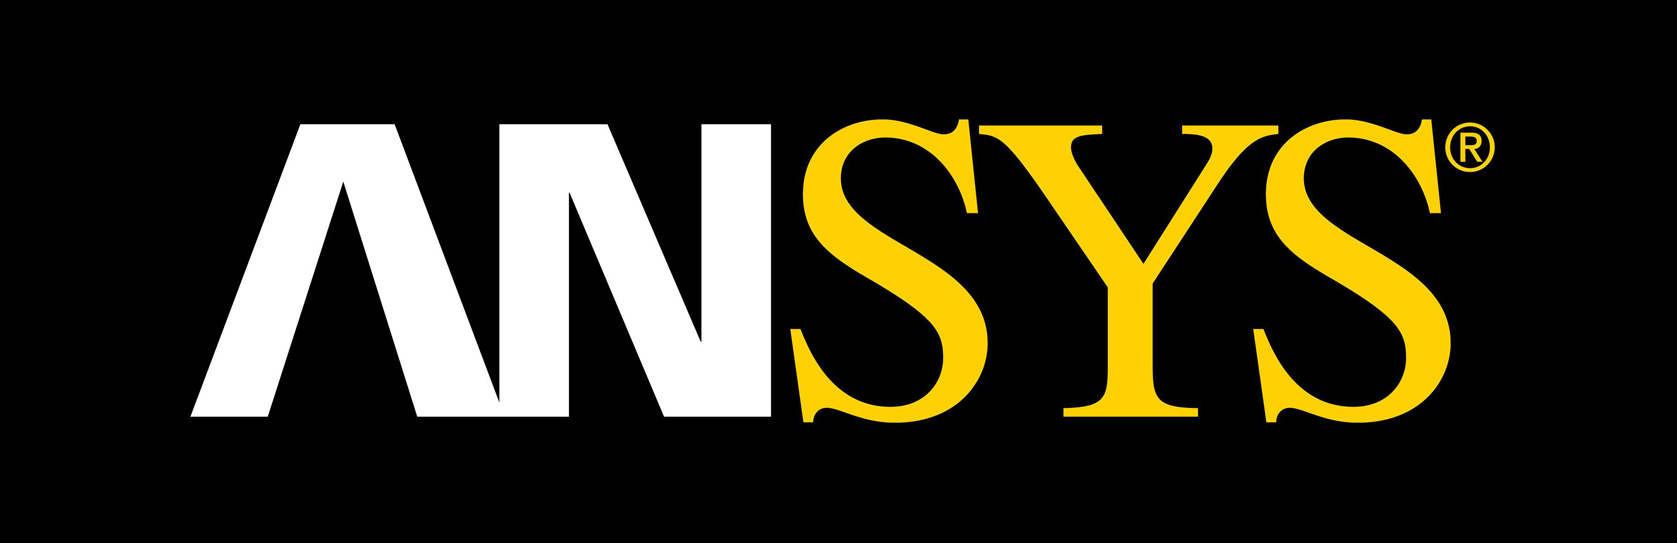 ansys.png